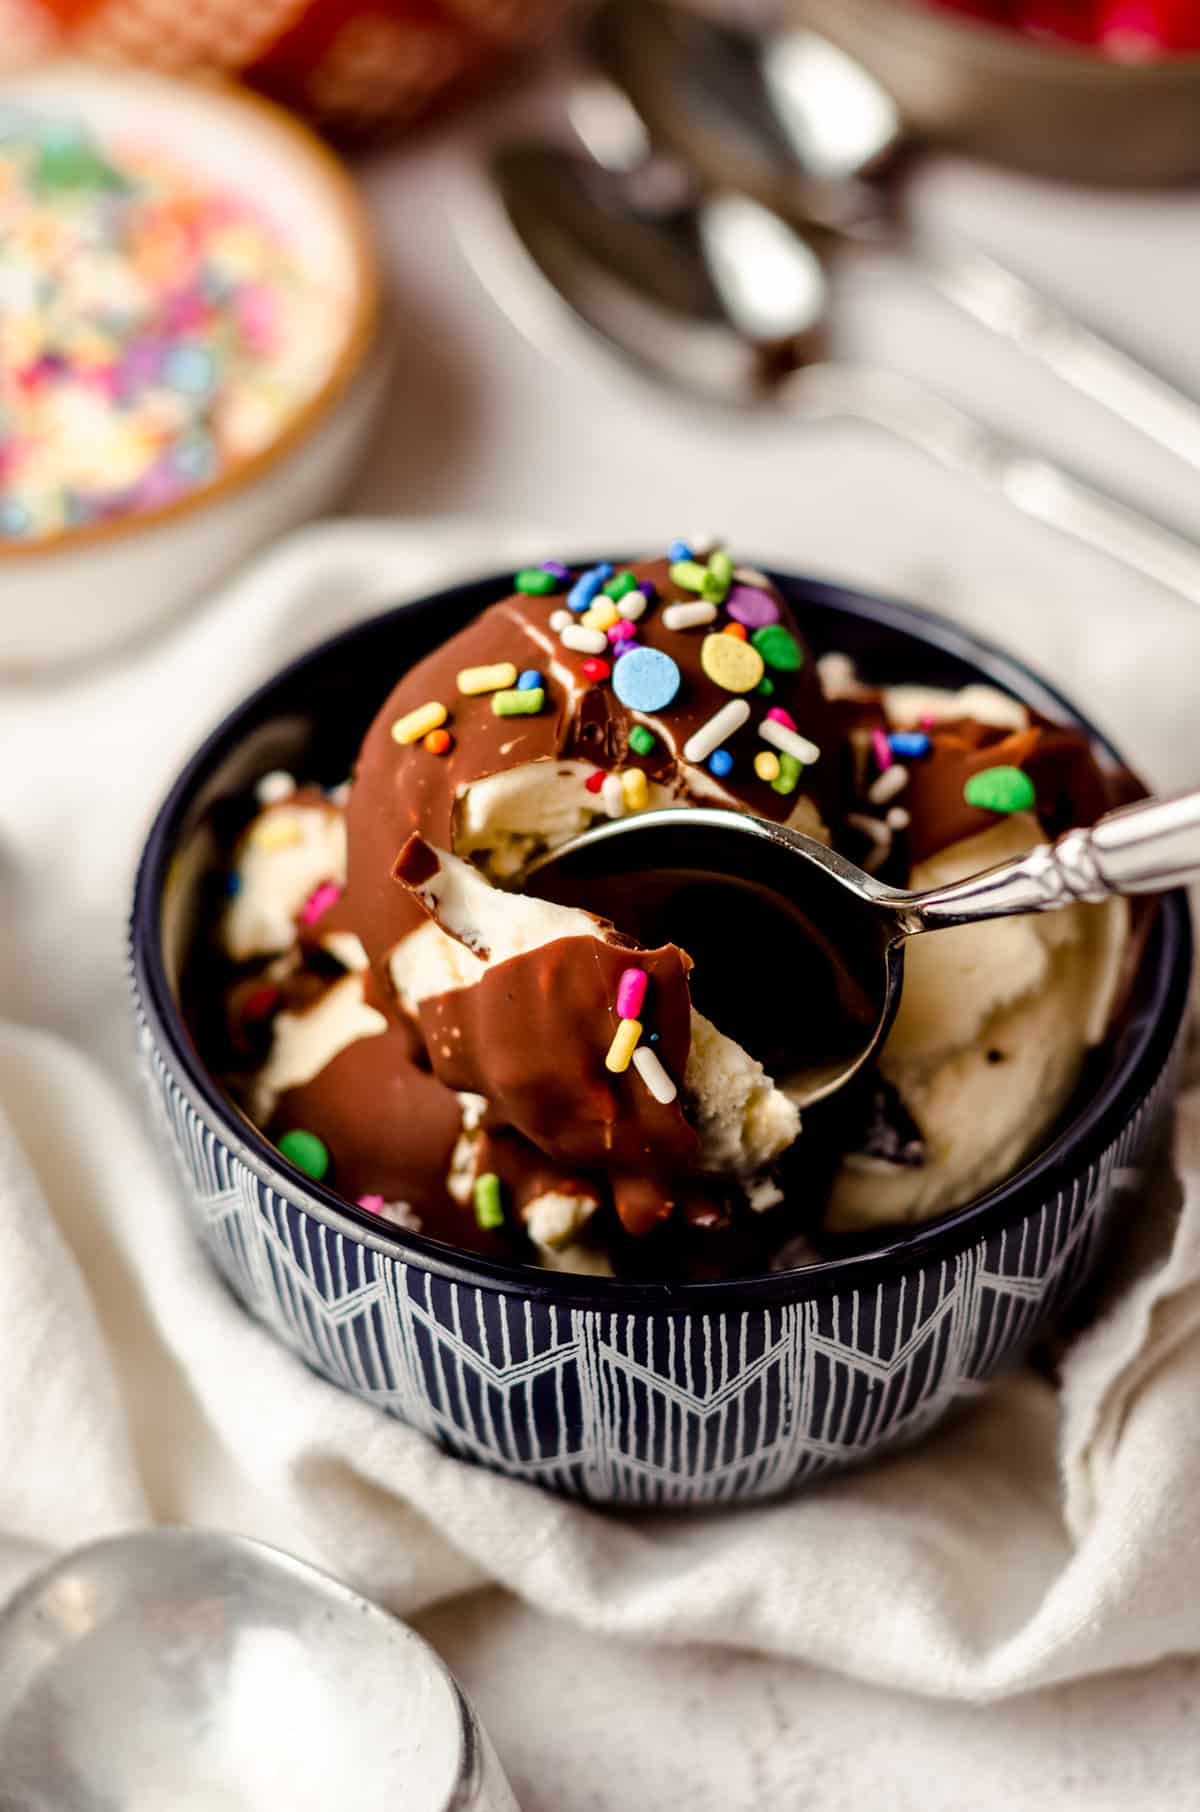 a bowl of ice cream with homemade magic shell and ice cream on it